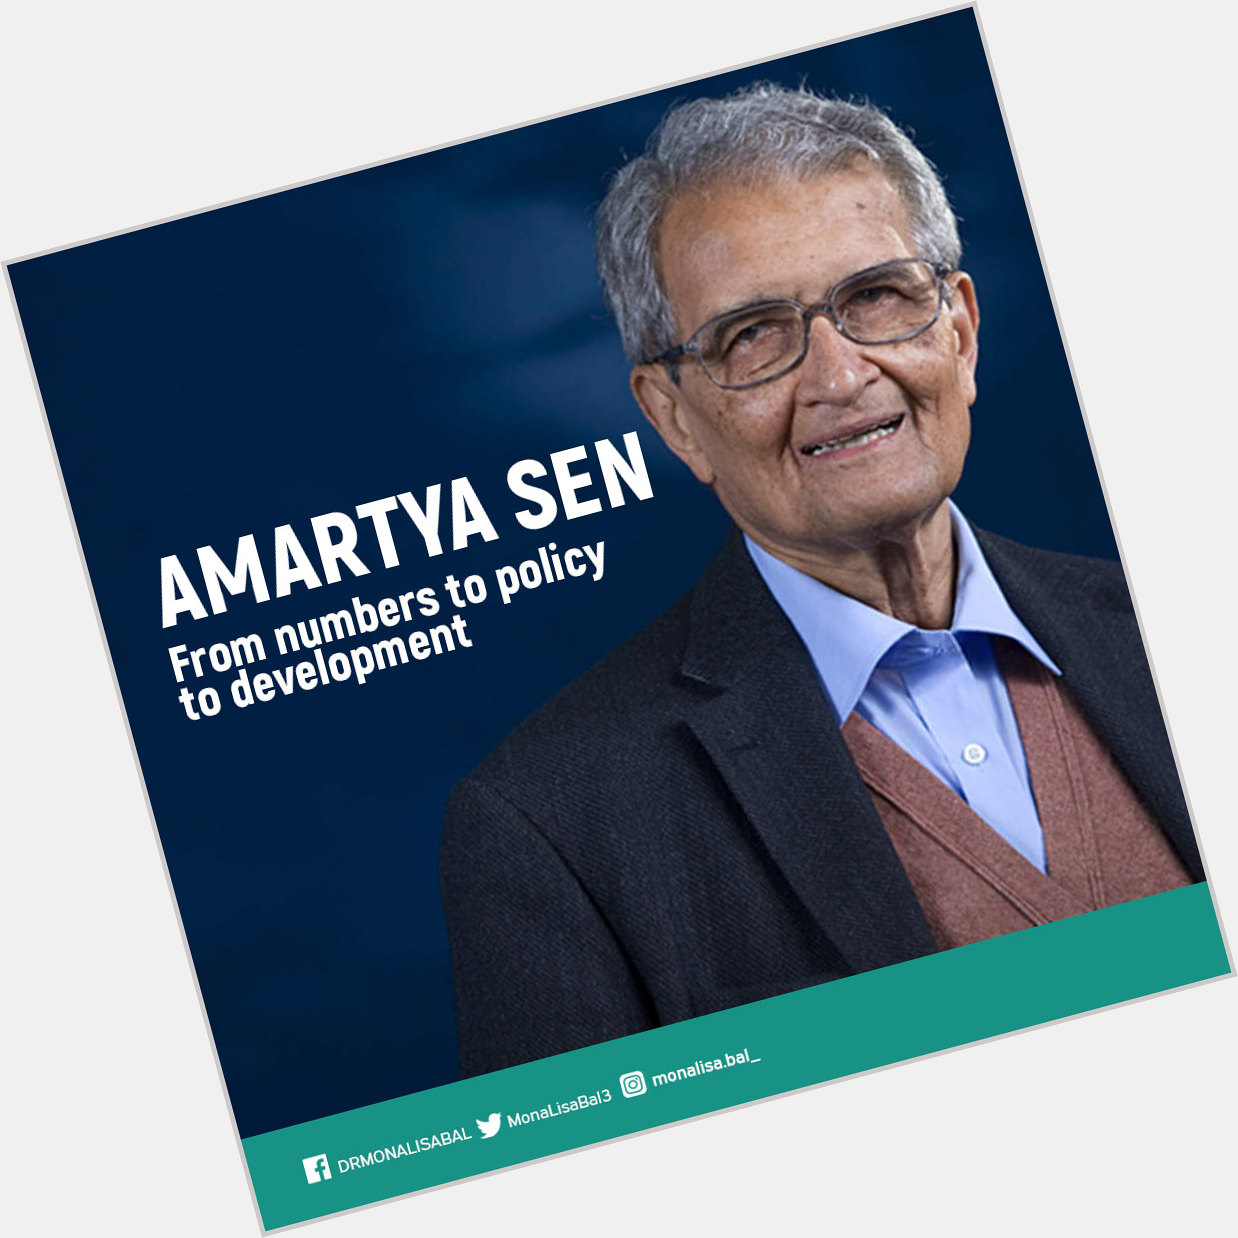 The man who made numbers work for the needy, a very happy birthday to Amartya Sen. 